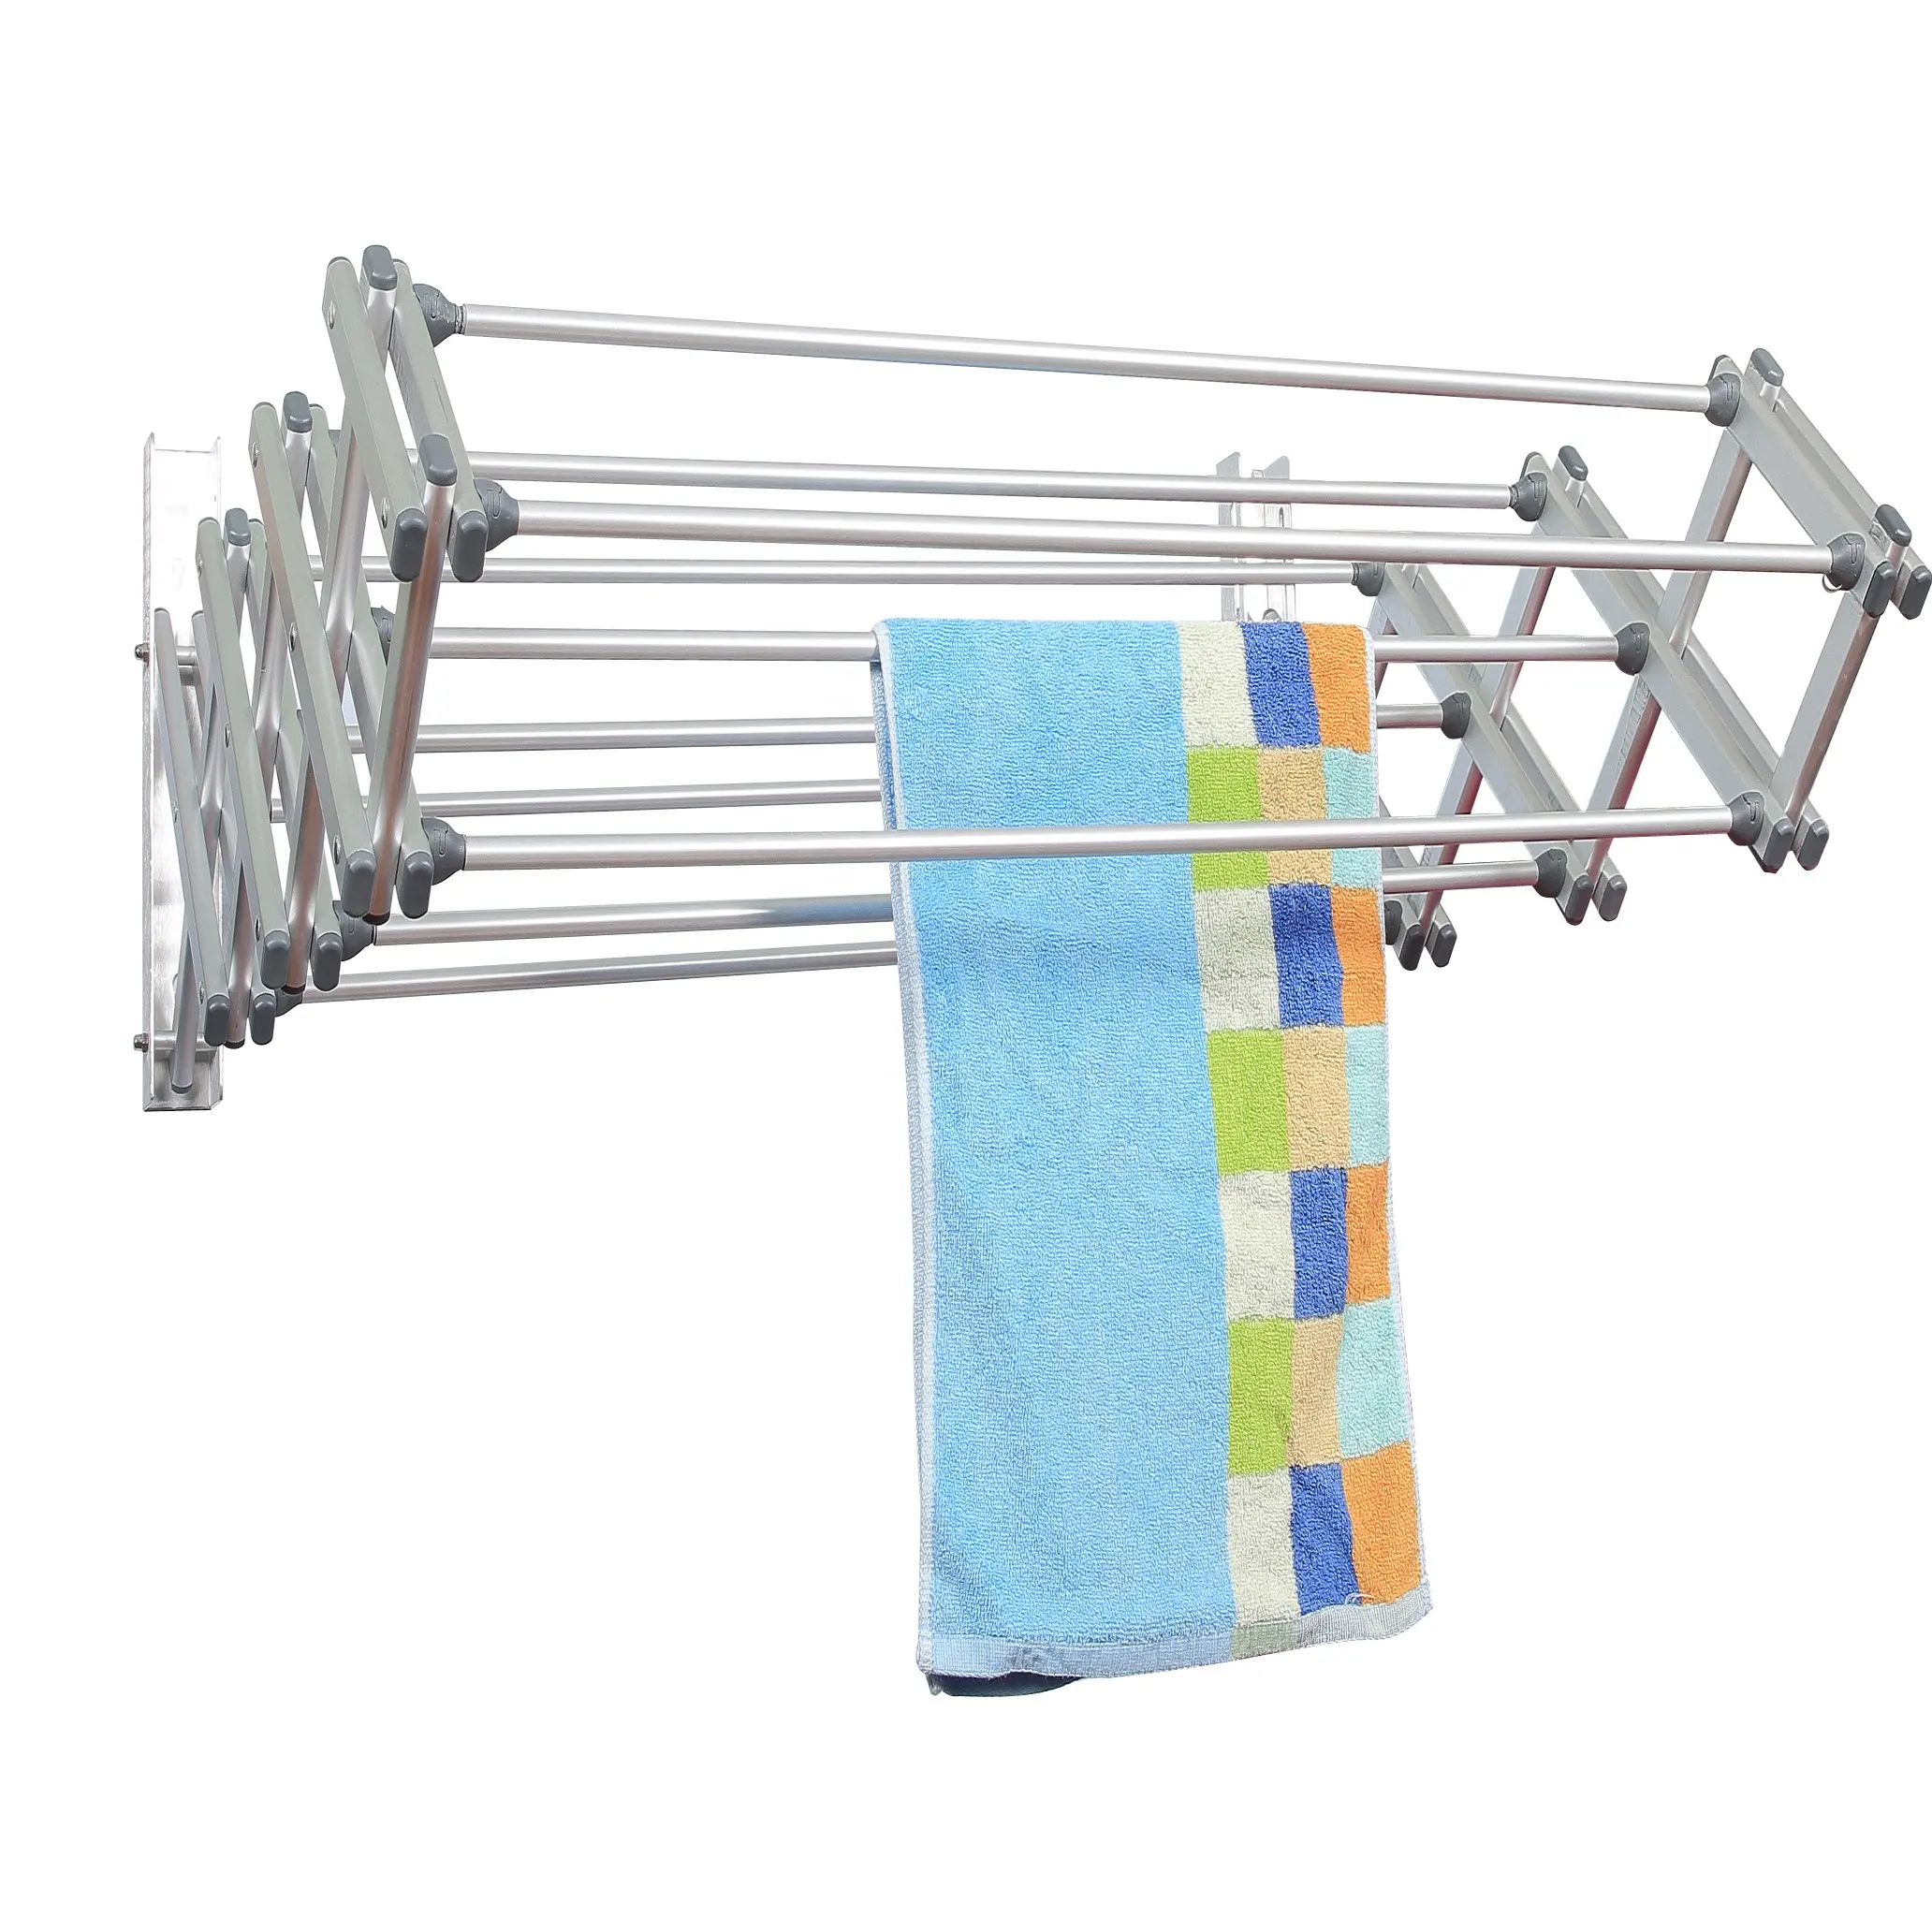 Hot Sale Retractable Wall Mounted Hanging Folding / Foldable Laundry / Clothes Drying Rack